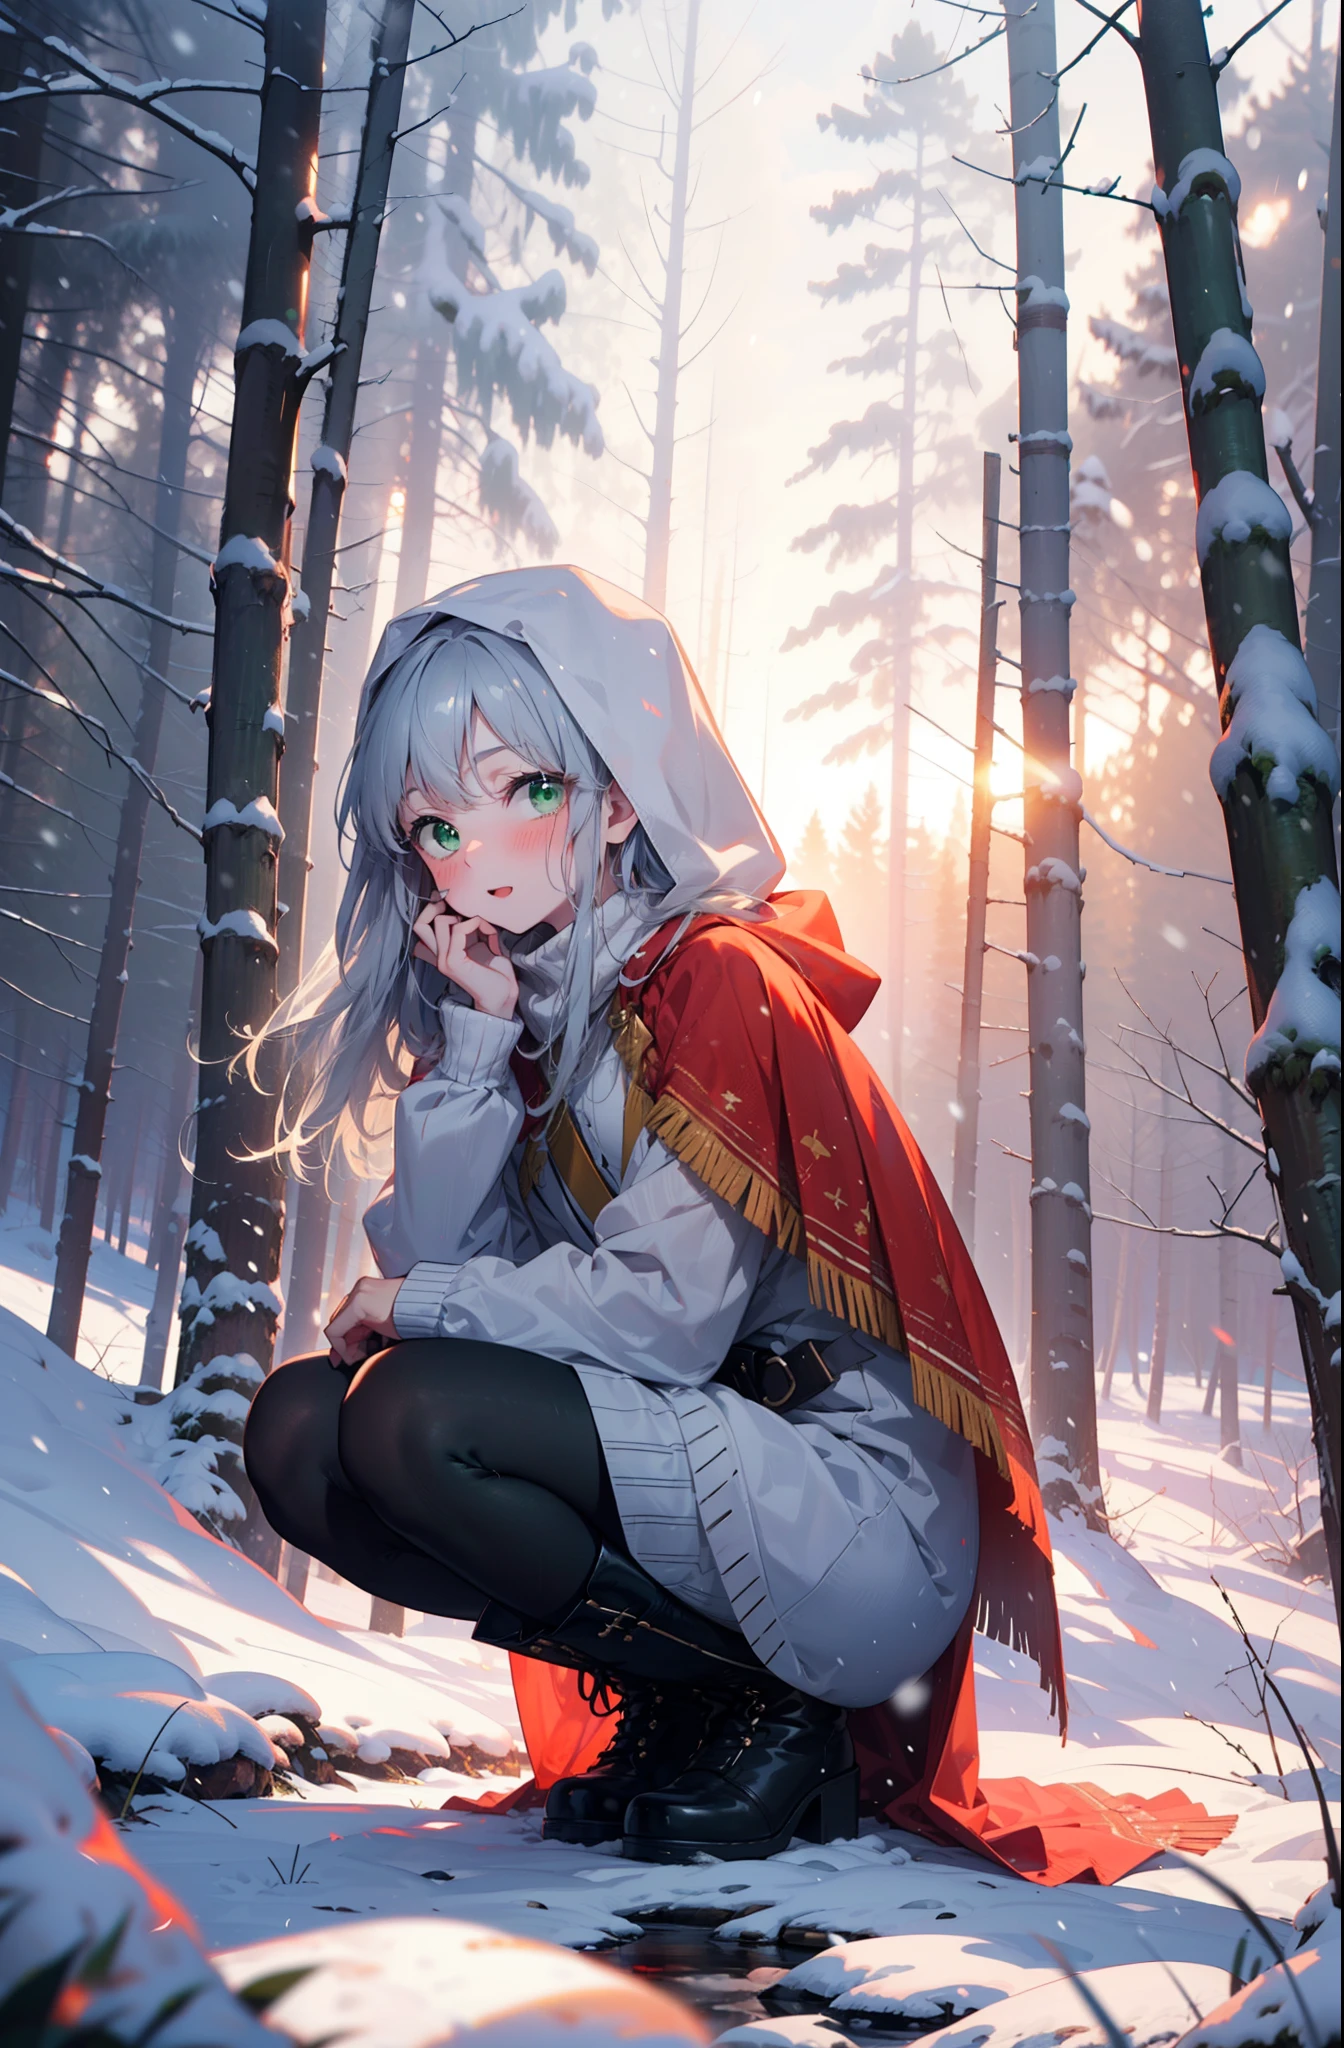 index, index, (Green Eyes:1.5), Silver Hair, Long Hair, (Flat Chest:1.2),smile,blush,White Breath,
Open your mouth,snow,Ground bonfire, Outdoor, boots, snowing, From the side, wood, suitcase, Cape, Blurred, , forest, White handbag, nature,  Squat, Mouth closed, Cape, winter, Written boundary depth, Black shoes, red Cape break looking at viewer, Upper Body, whole body, break Outdoor, forest, nature, break (masterpiece:1.2), highest quality, High resolution, unity 8k wallpaper, (shape:0.8), (Beautiful and beautiful eyes:1.6), Highly detailed face, Perfect lighting, Highly detailed CG, (Perfect hands, Perfect Anatomy),